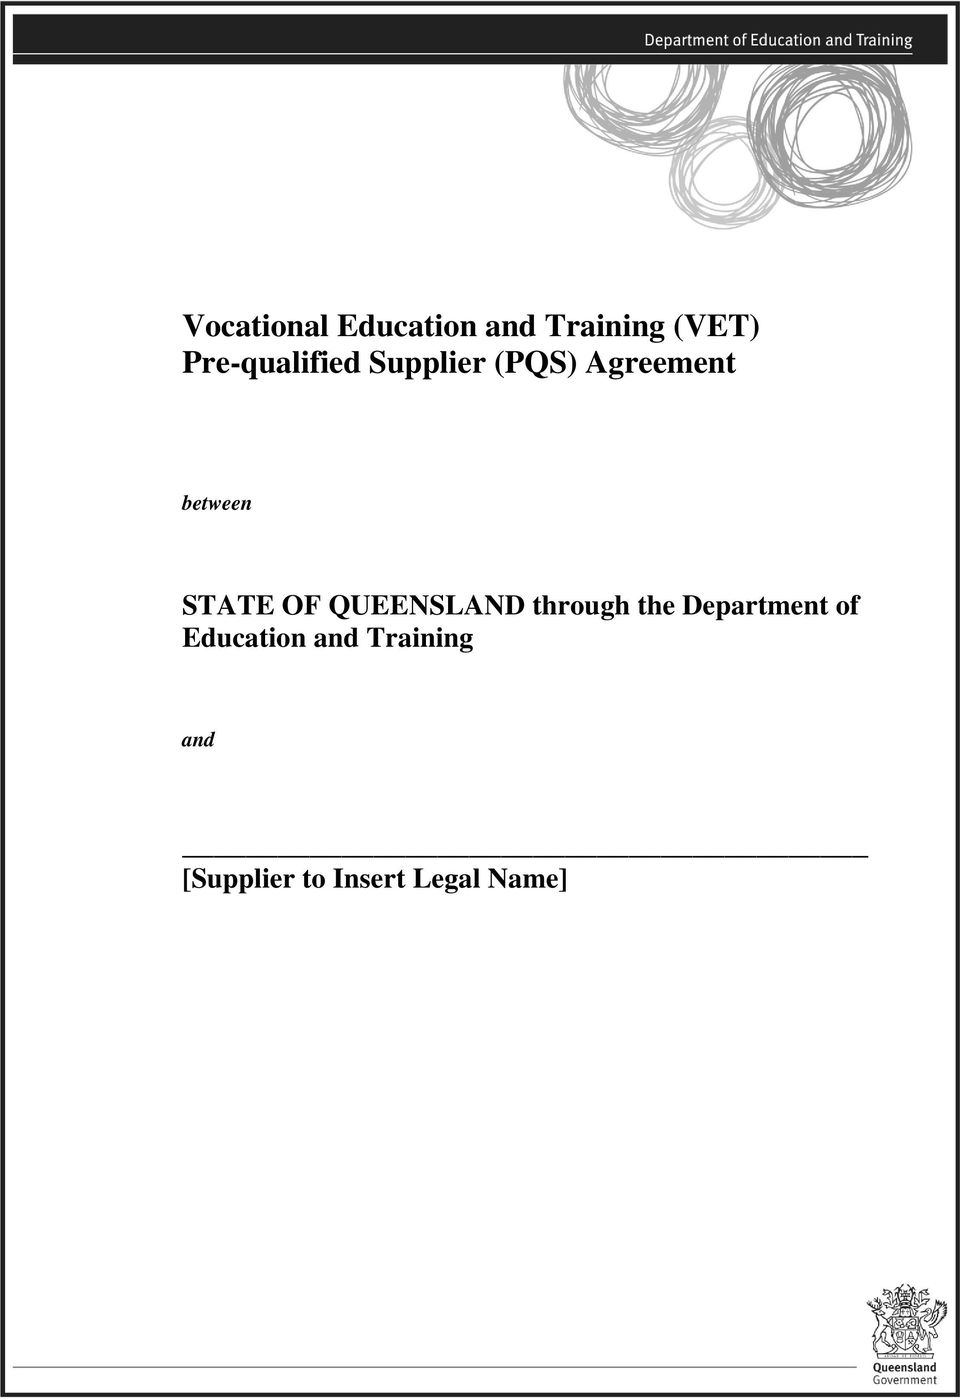 STATE OF QUEENSLAND through the Department of